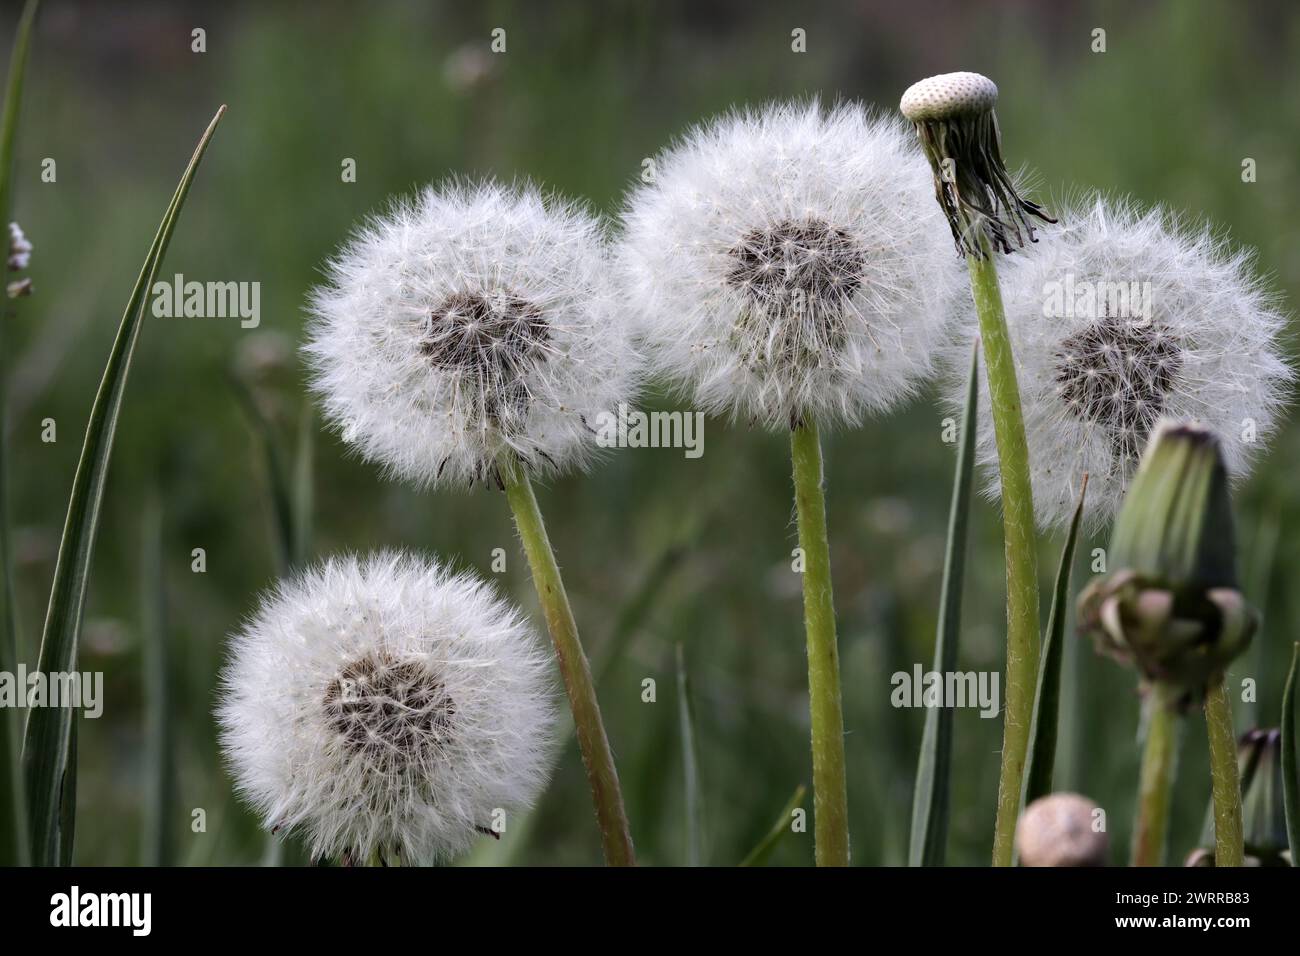 The end of dandelion flower Stock Photo